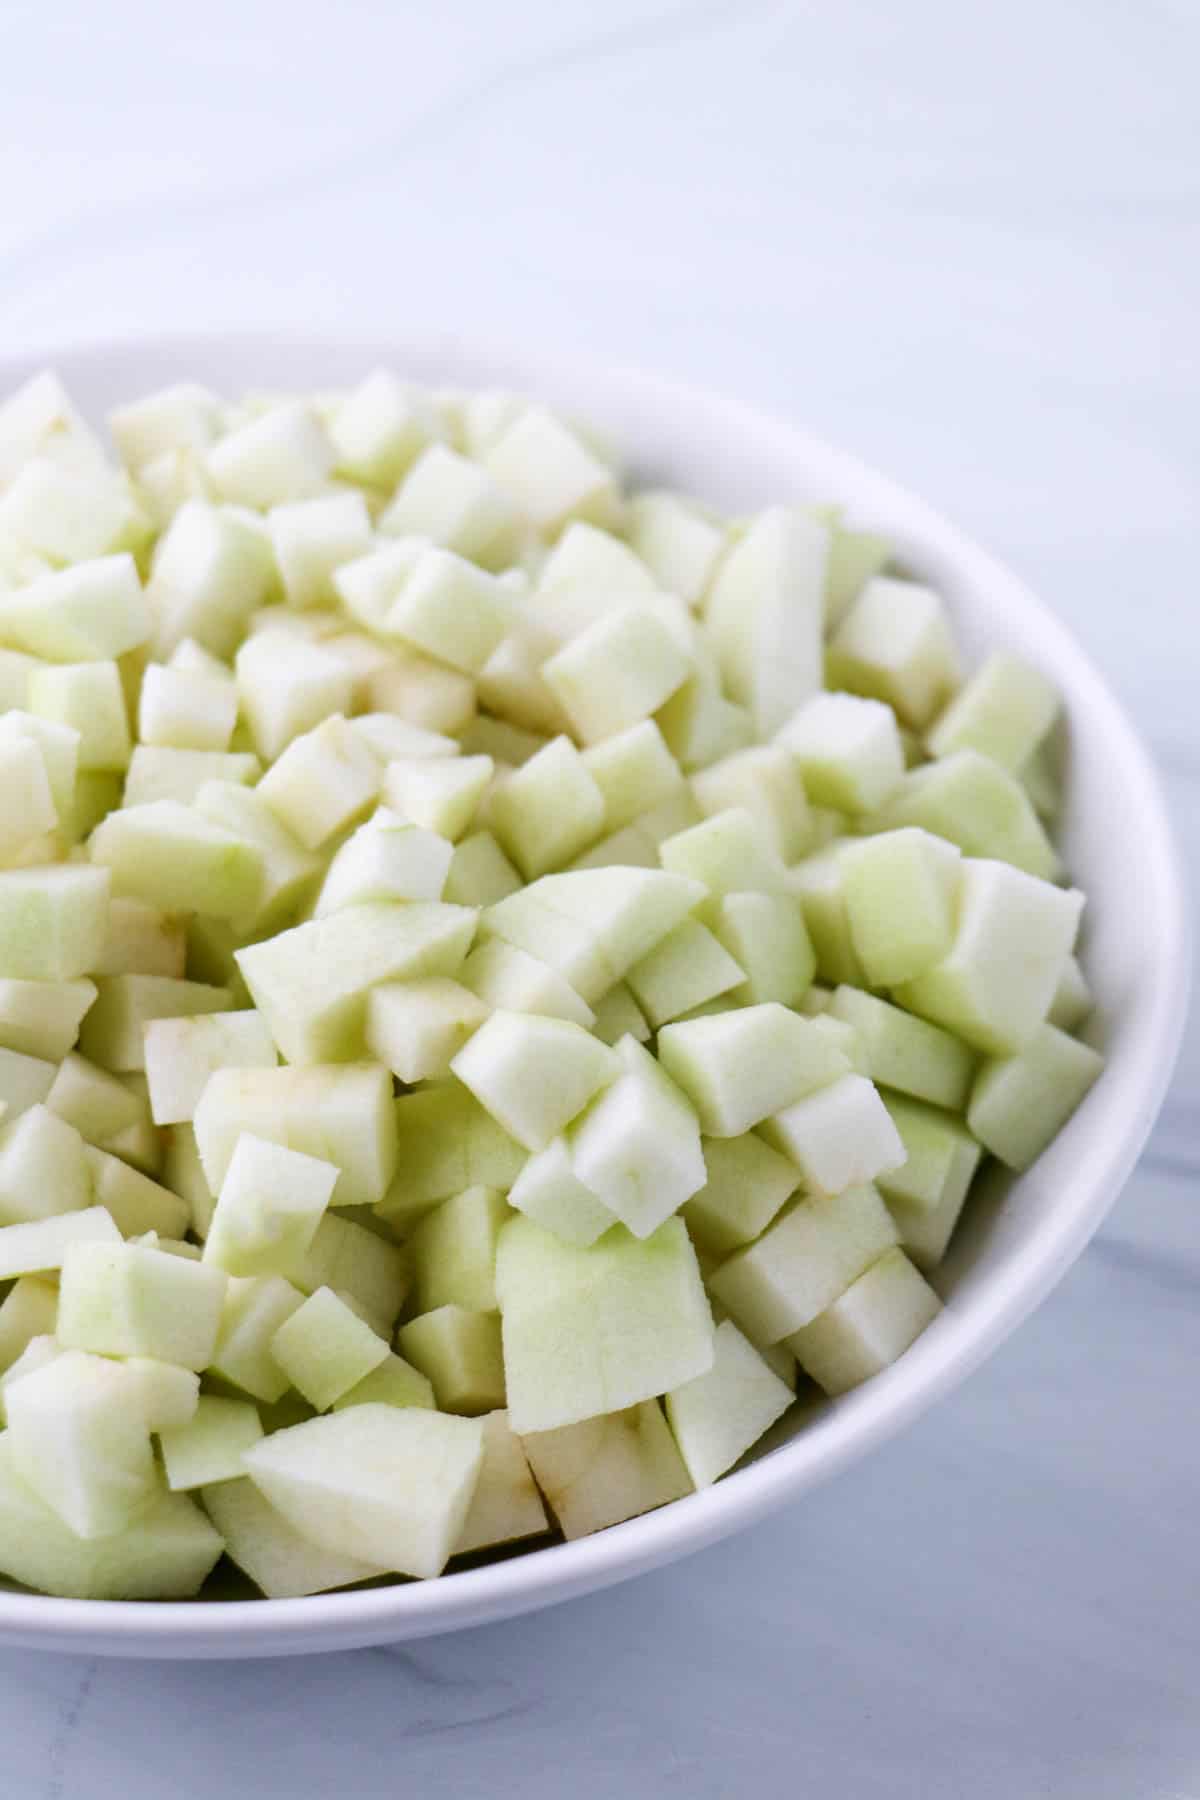 Chopped up apples in a white bowl.